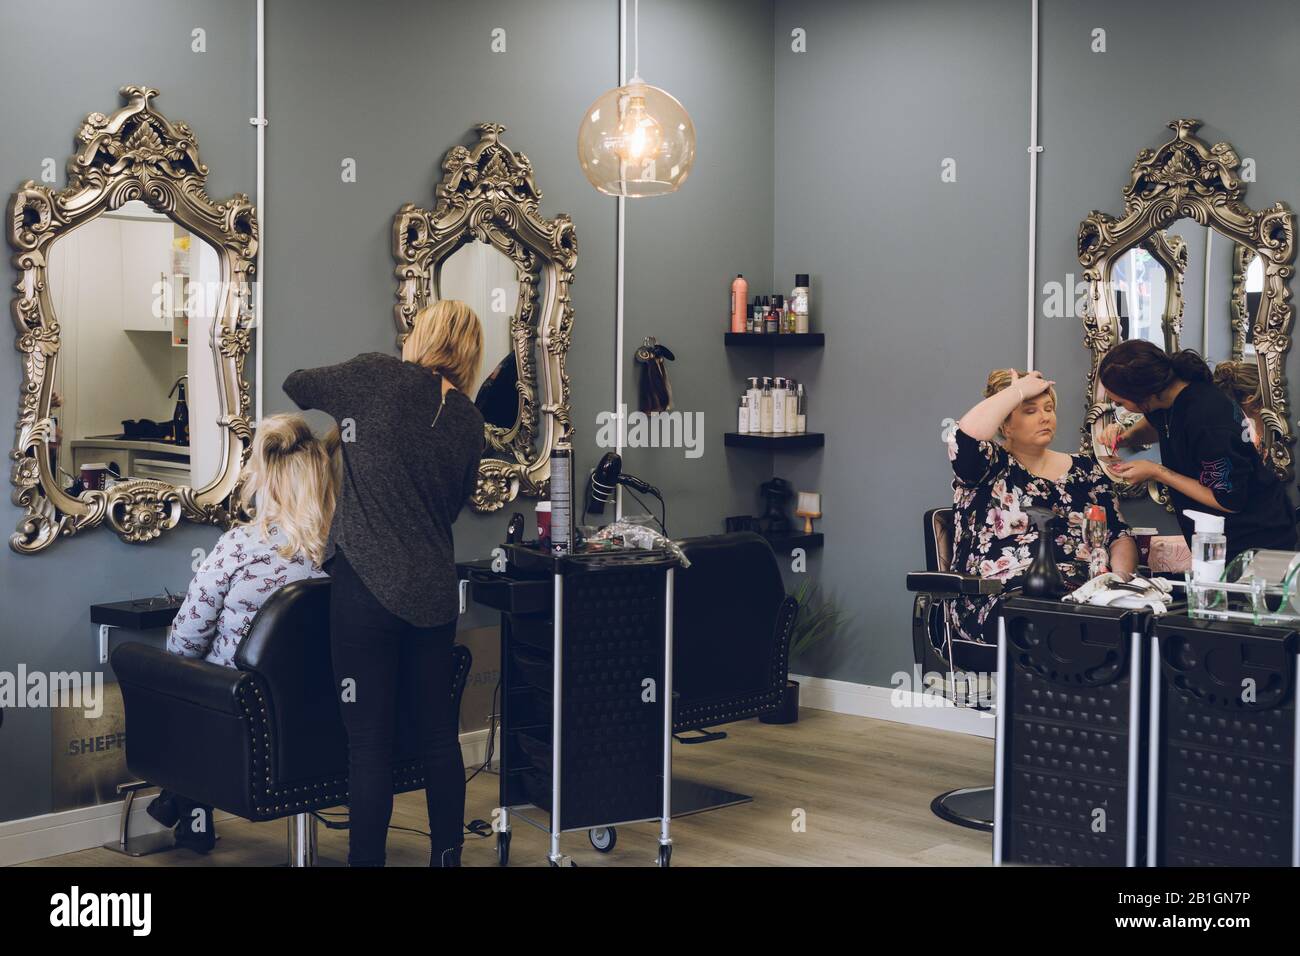 The interior of a hair salon with a hair dresser styling hair and a makeup  artist applying makeup Stock Photo - Alamy